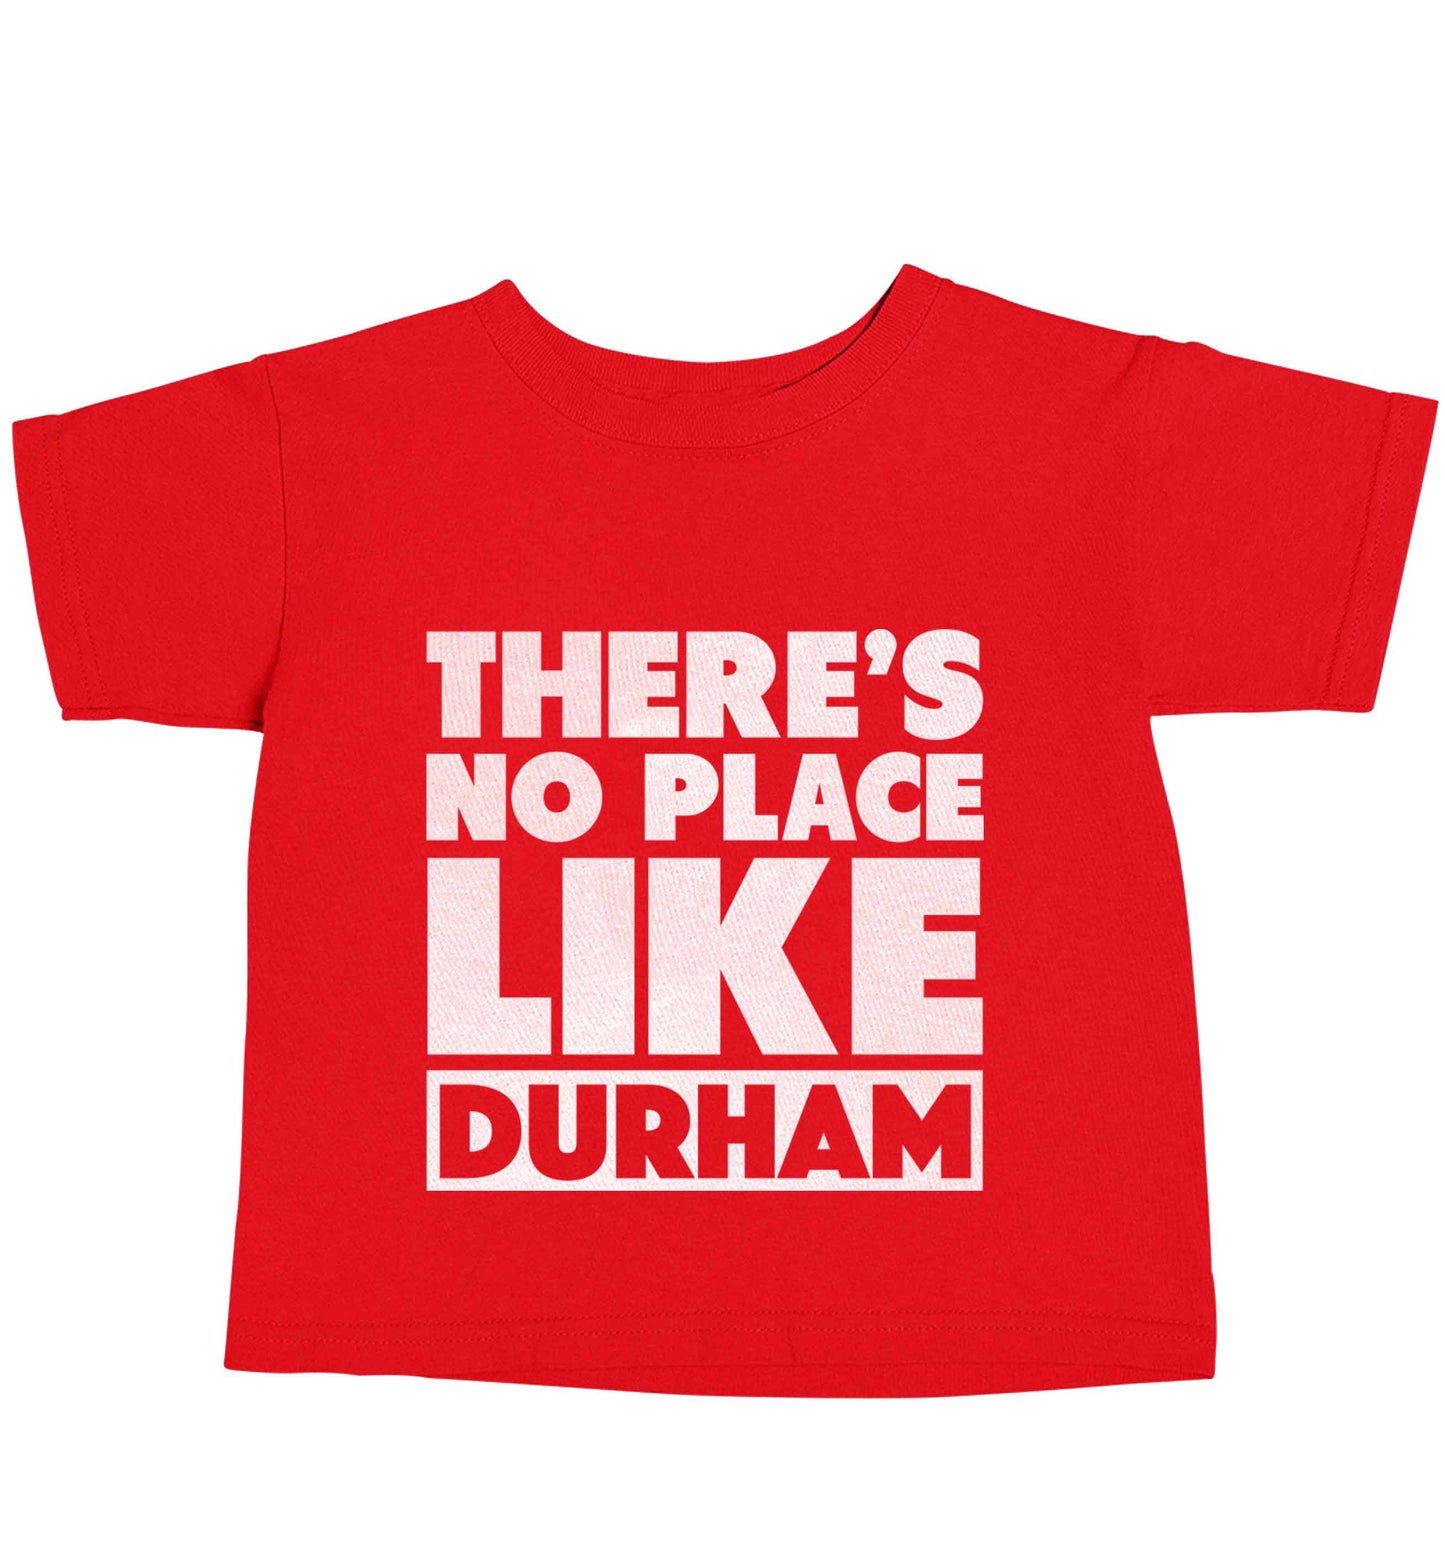 There's no place like Durham red baby toddler Tshirt 2 Years